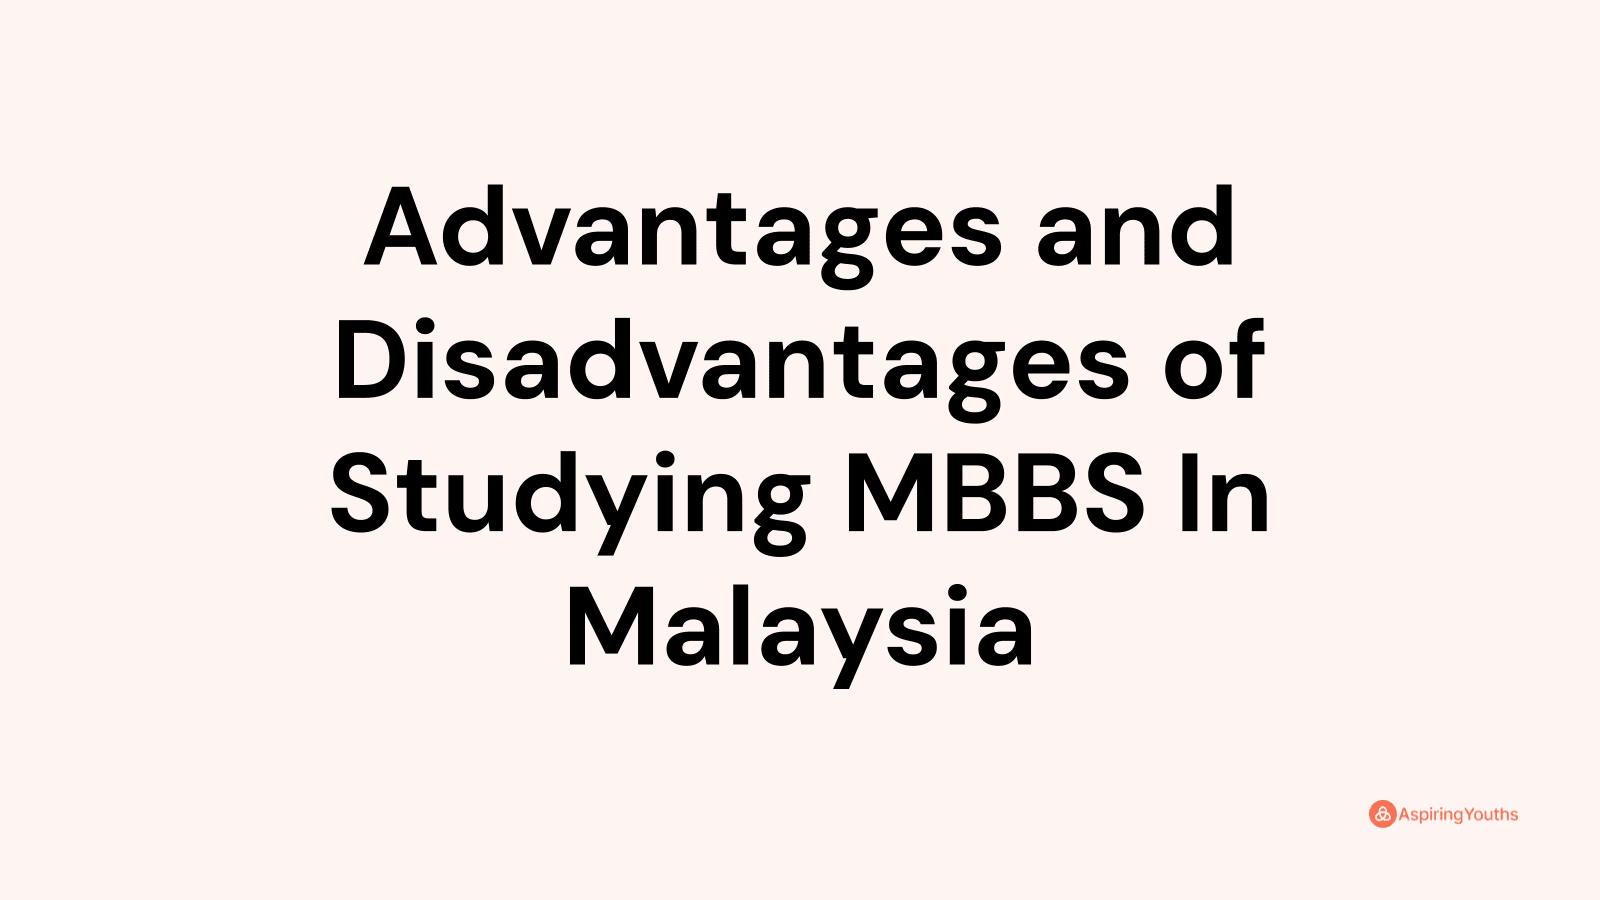 Advantages and disadvantages of Studying MBBS In Malaysia